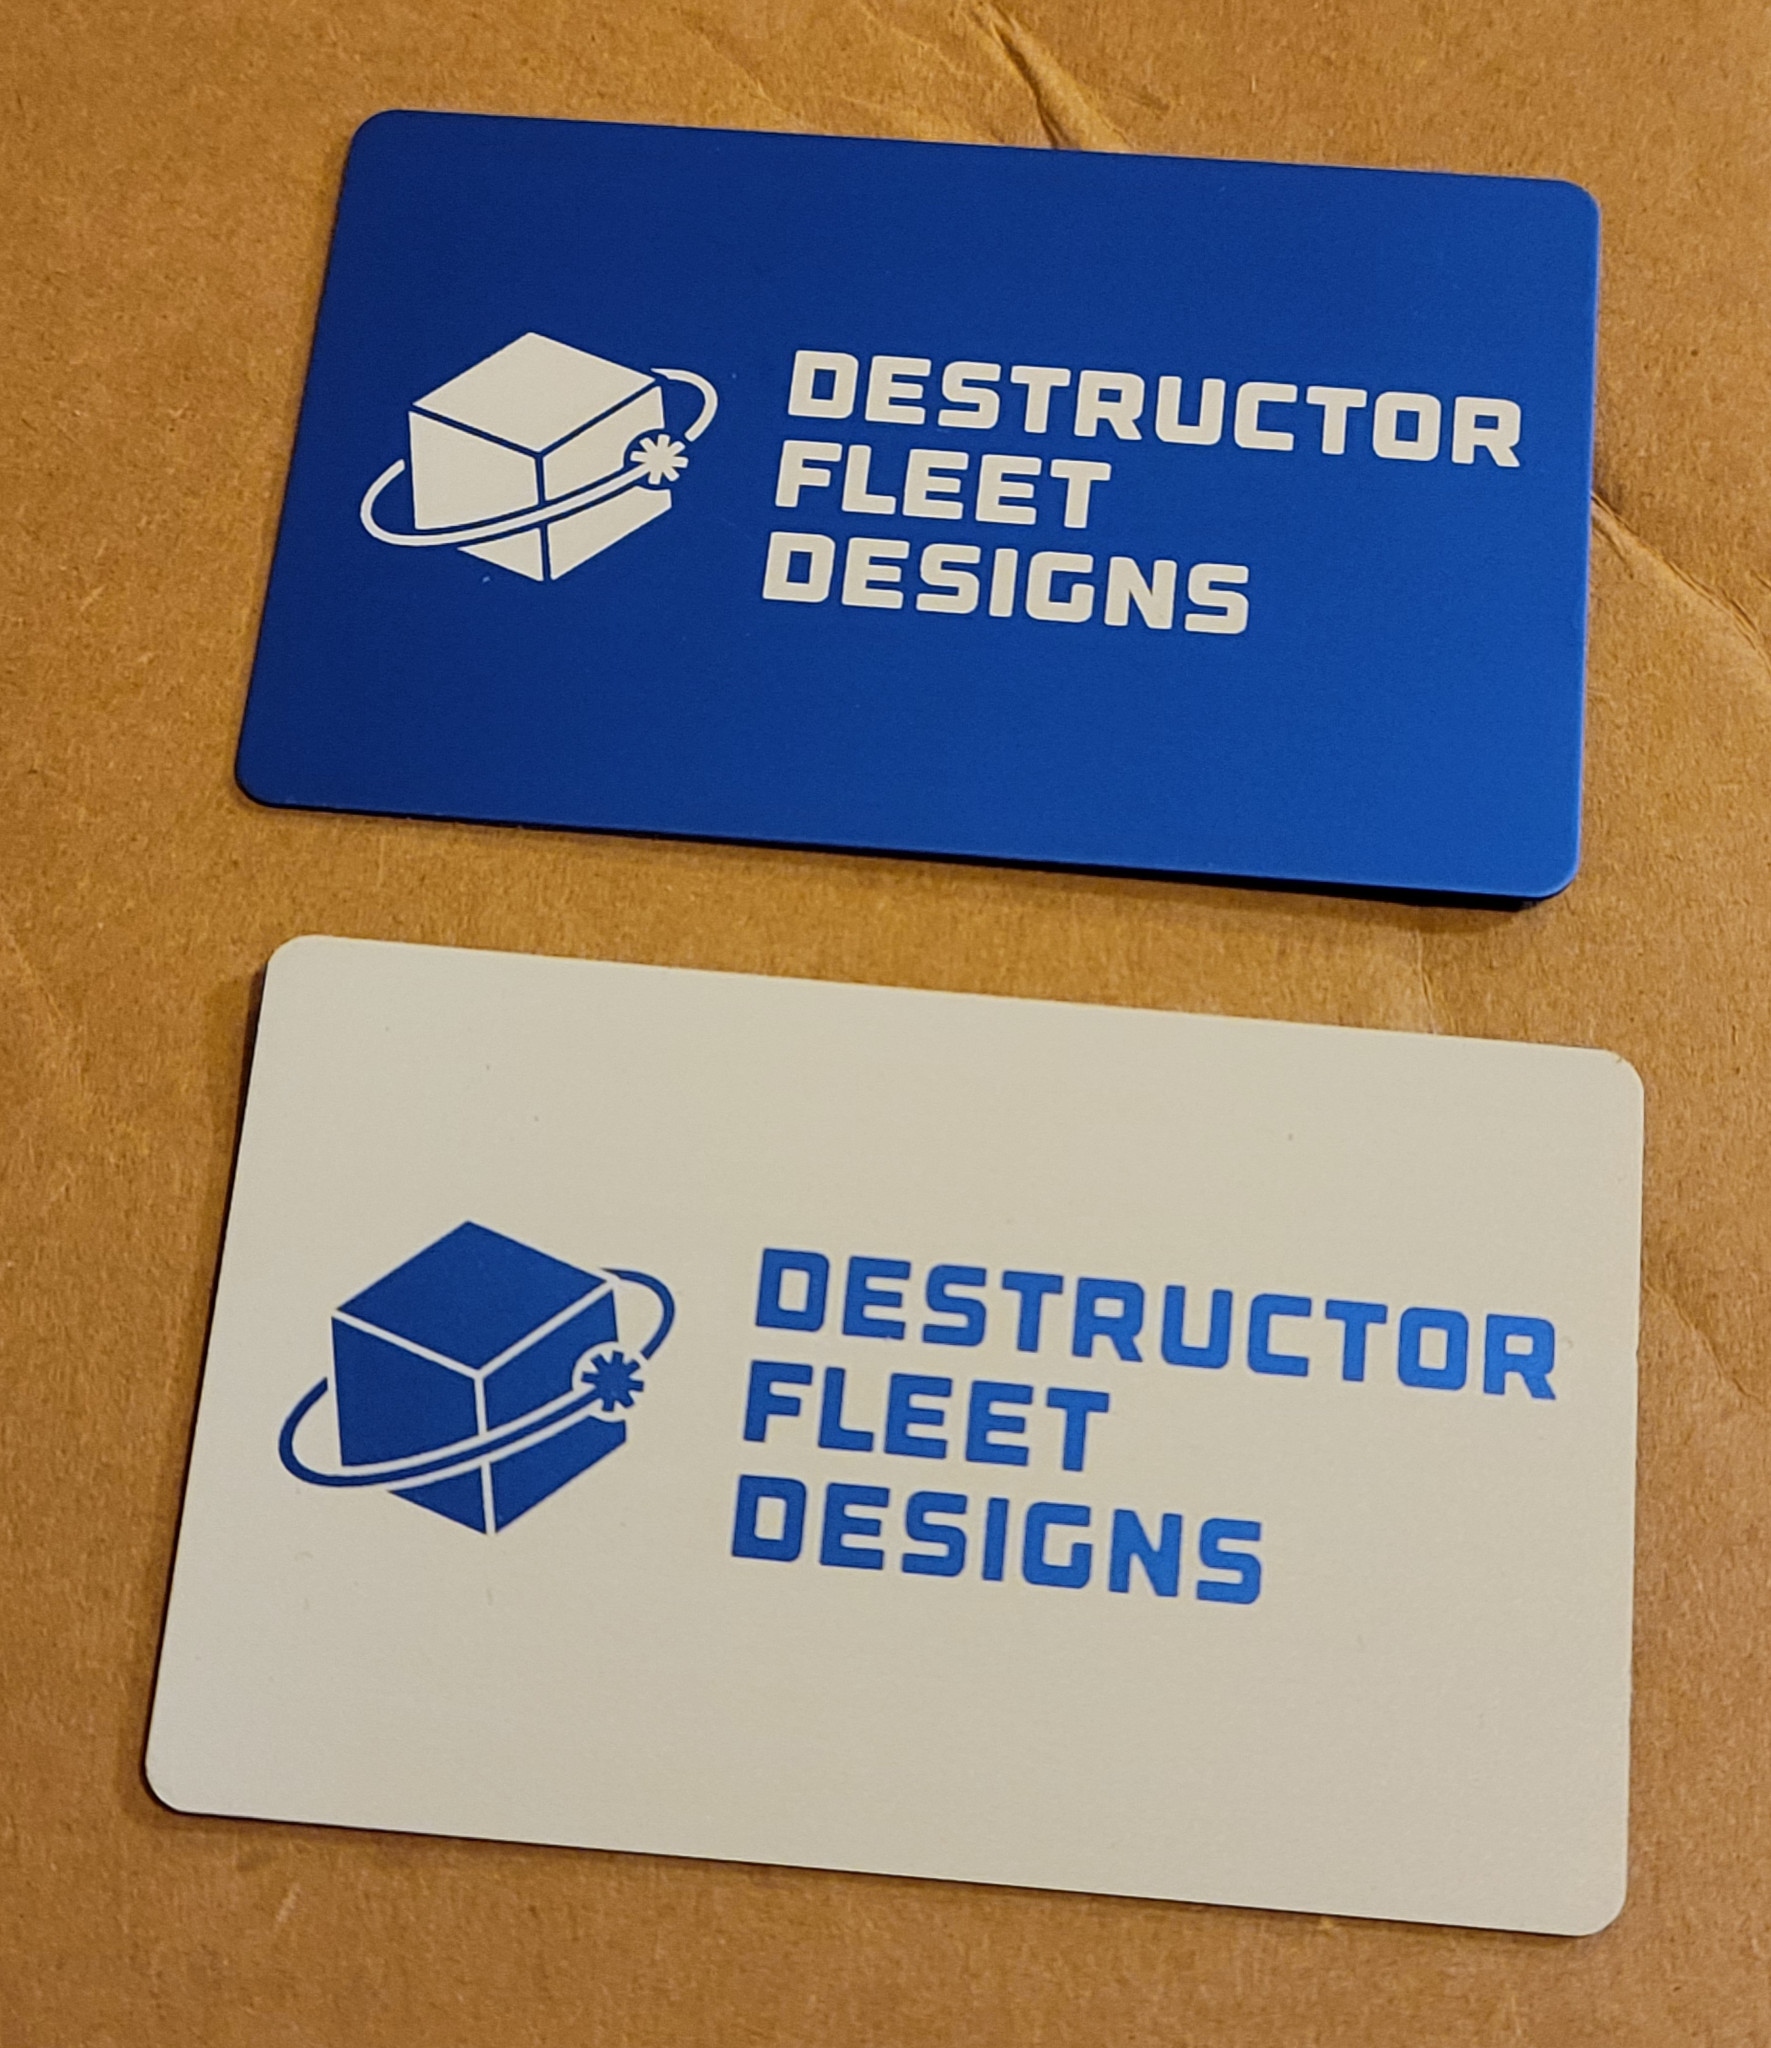 Two anodized aluminum parts engraved with the Destructor Fleet Designs logo